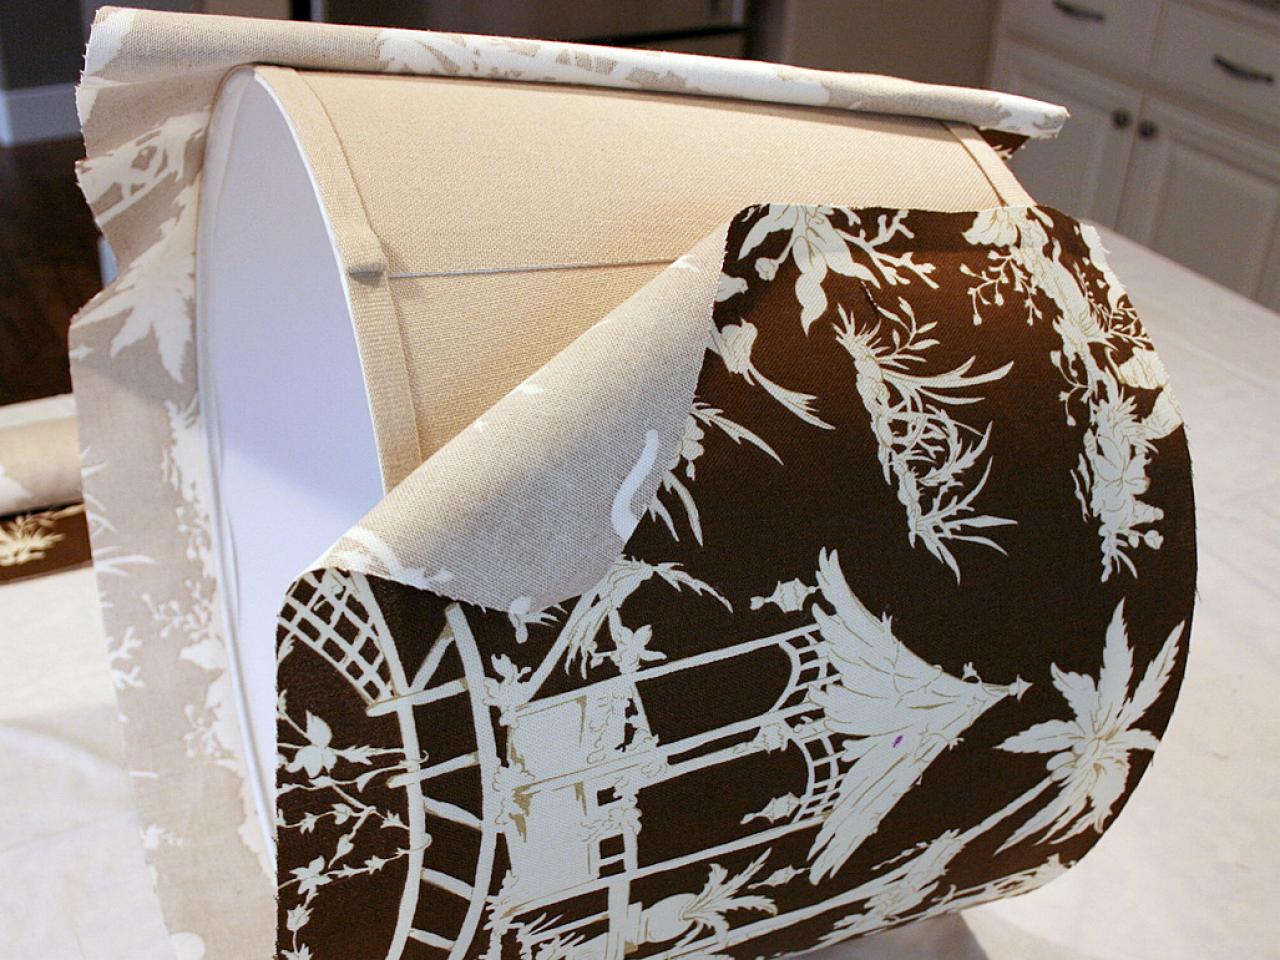 Custom Fabric Covered Lampshade, How To Cover Lampshade Frame With Fabric